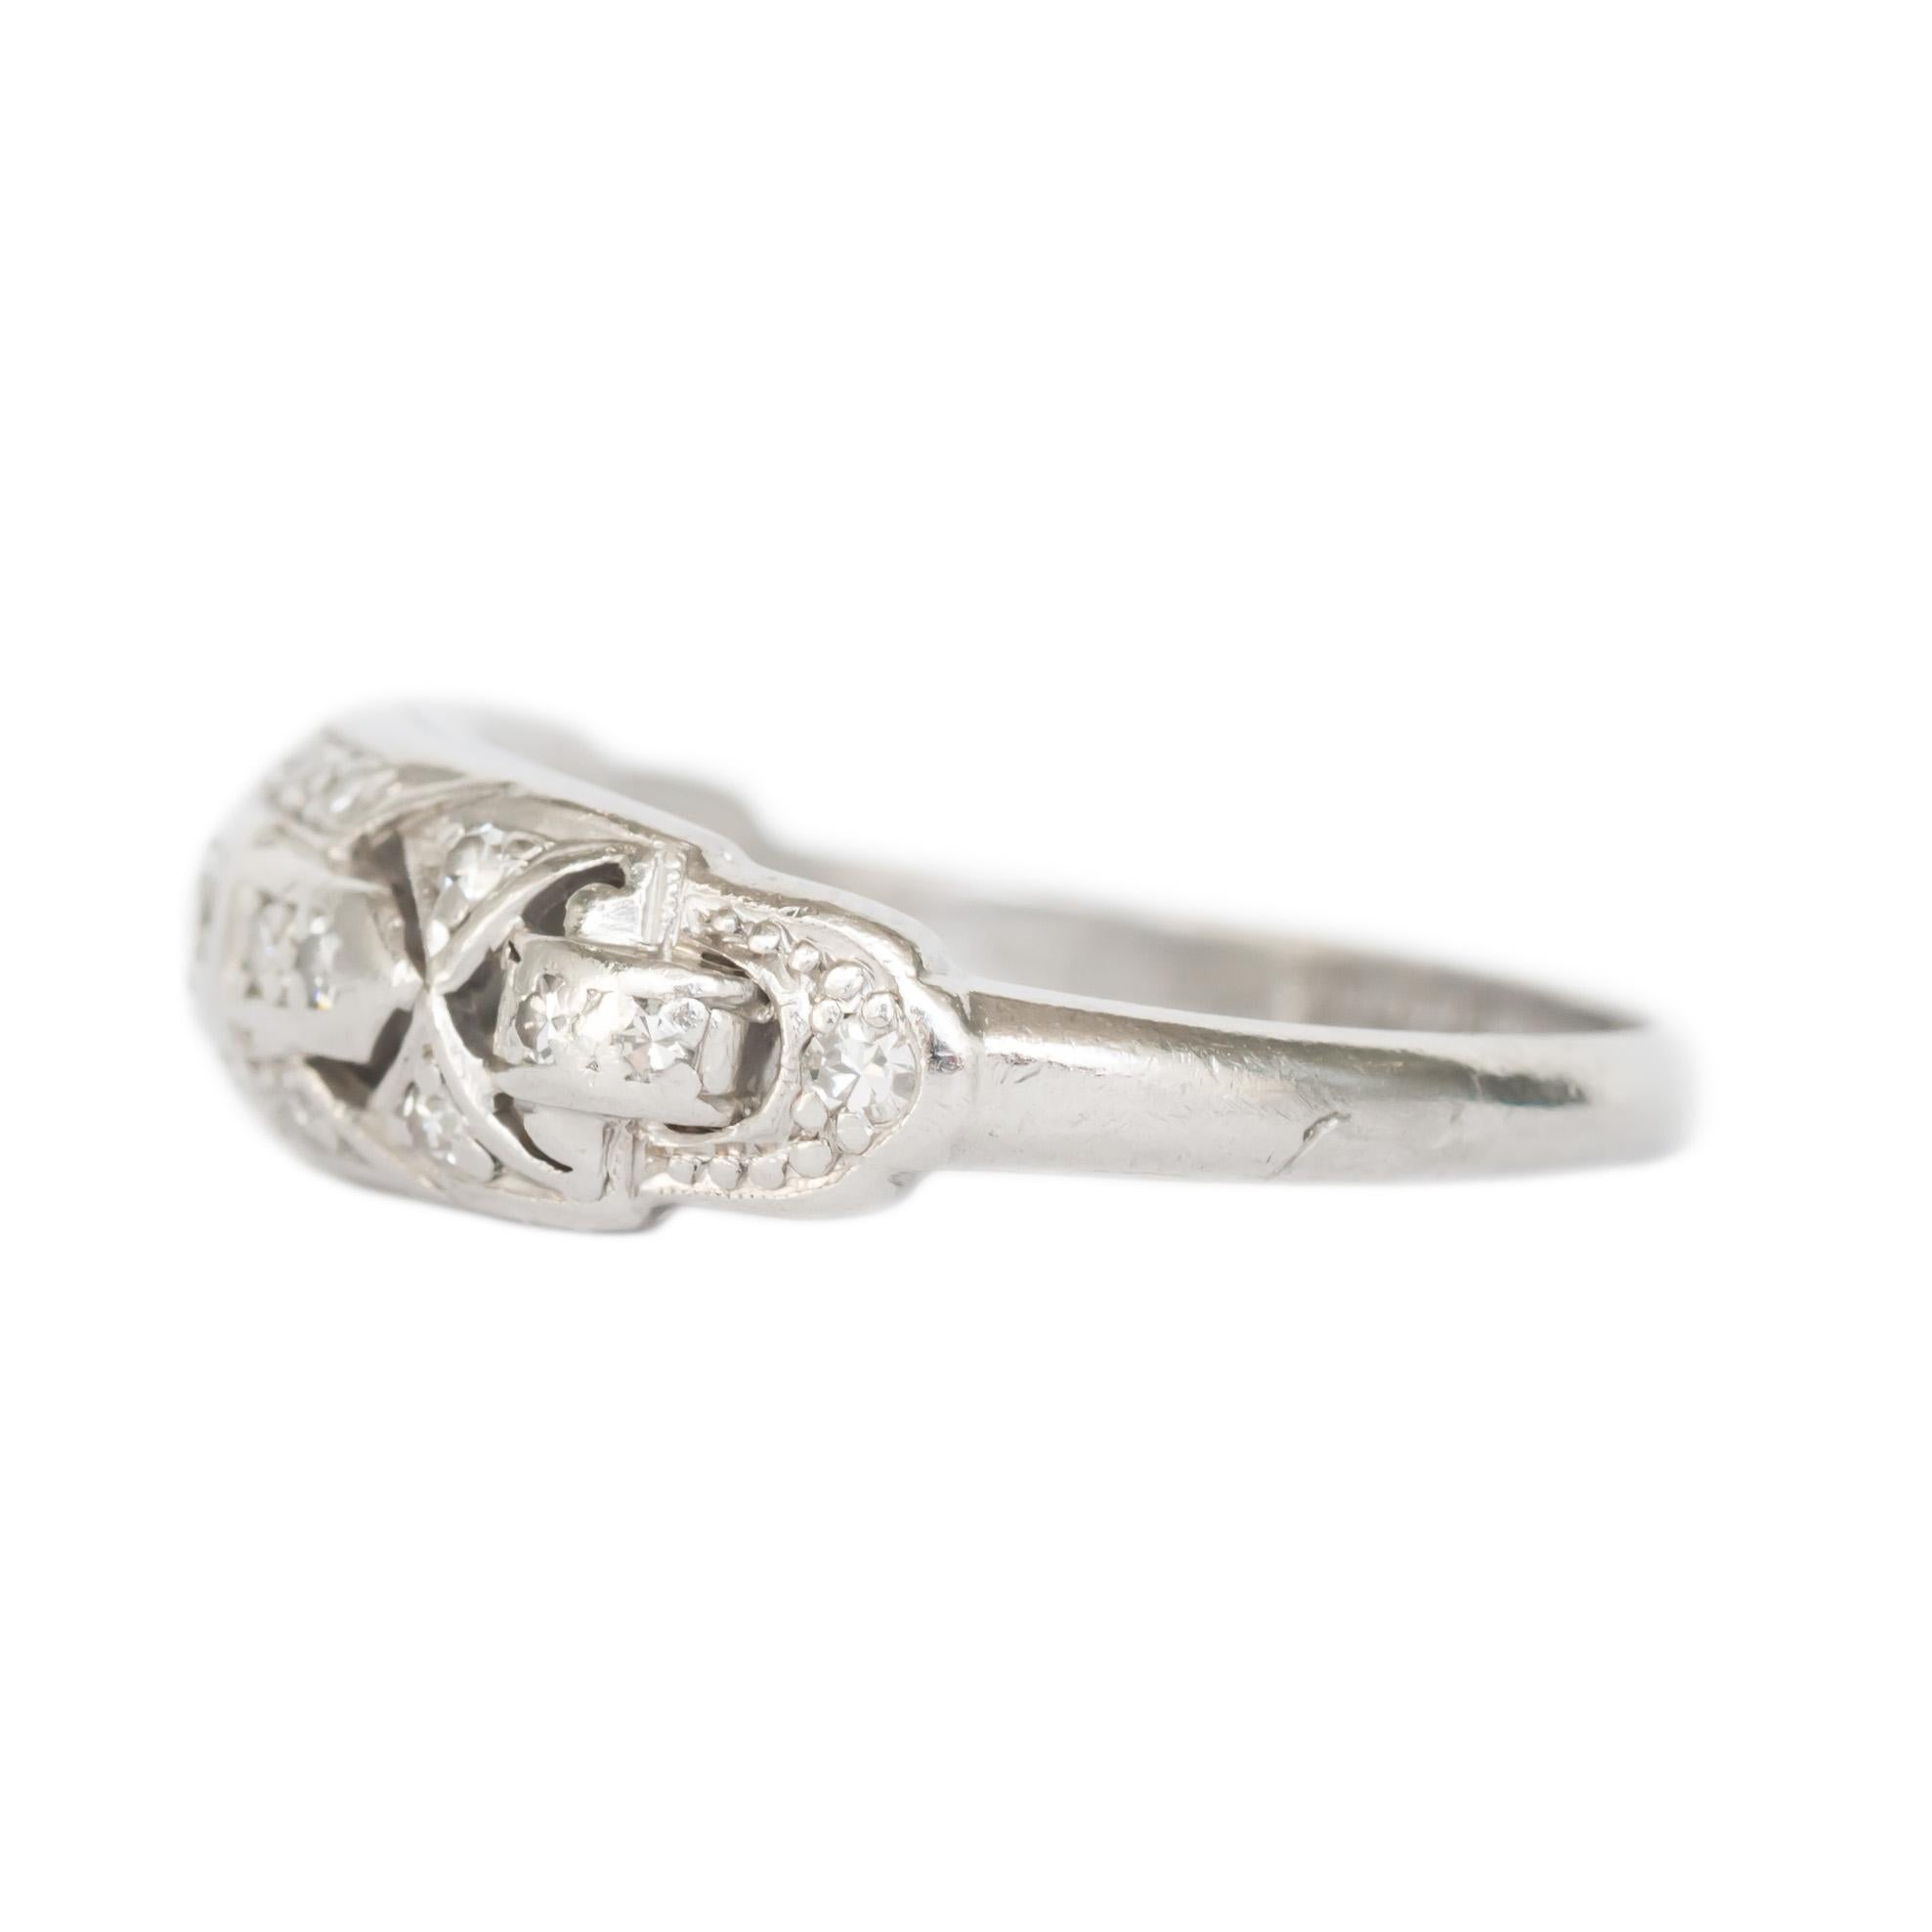 Item Details: 
Ring Size: Approximately 7.10
Metal Type: Platinum
Weight: 5.2 grams

Stone Details: 
Shape: Antique Single Cut
Total Carat Weight: .15 carat total weight
Color: F
Clarity: VS

Finger to Top of Stone Measurement: 4.01mm